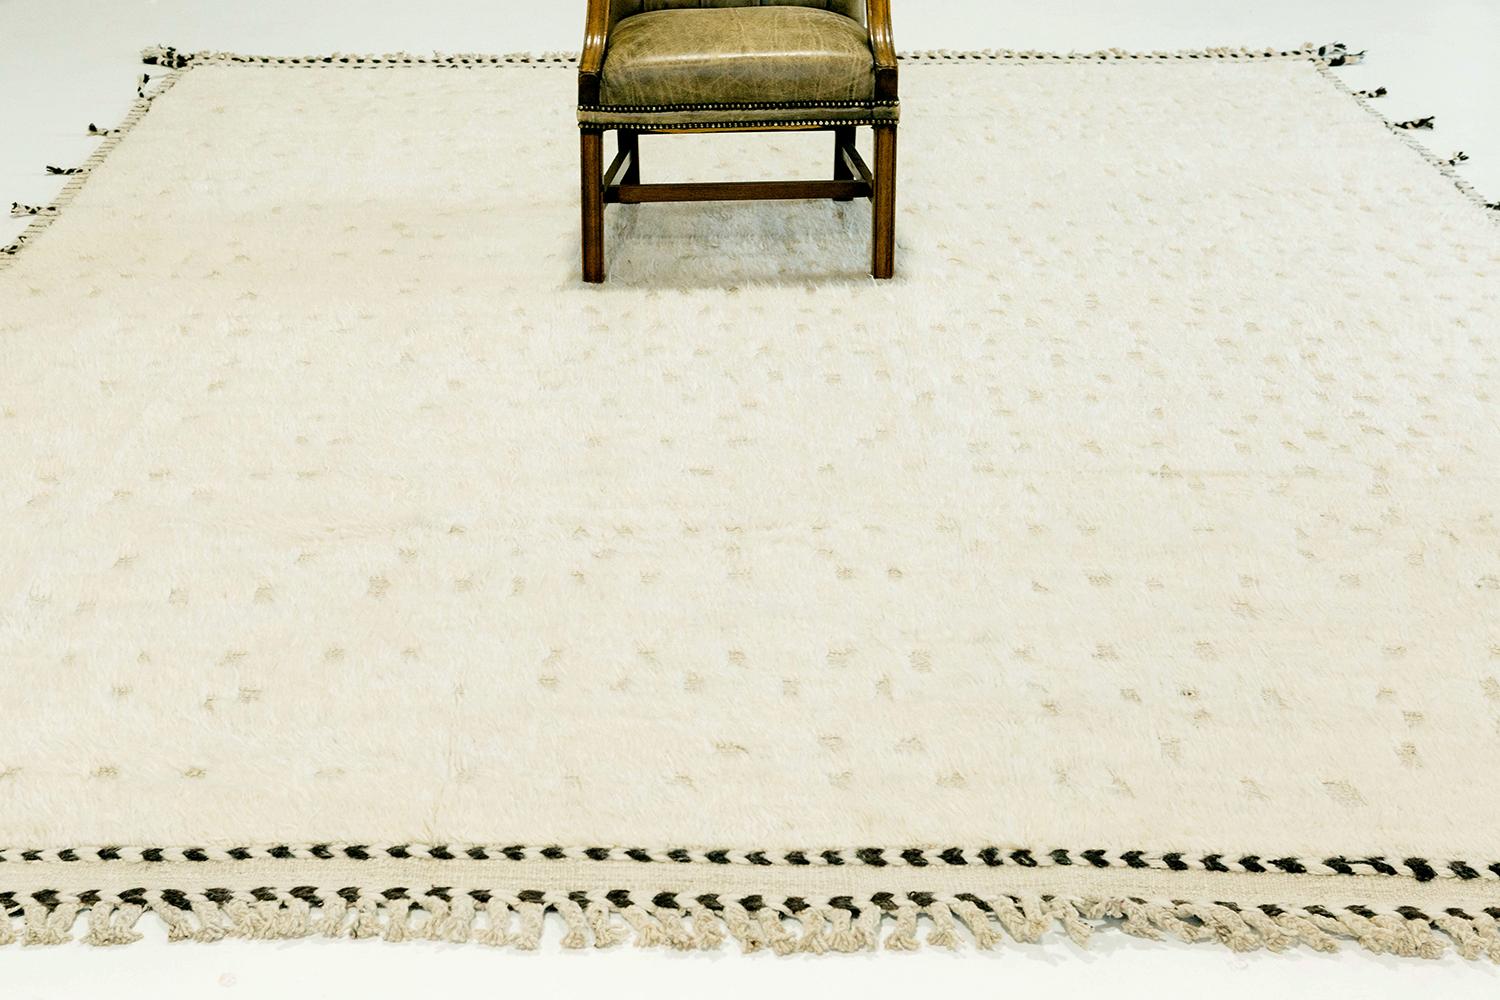 Olea' is a hand knotted wool shag rug built on a flat-weave base. Tassel detailing run along the sides with dark stitch marks. This playful piece has a perfectly white foundation with round embossed details filling in the space and playing with the